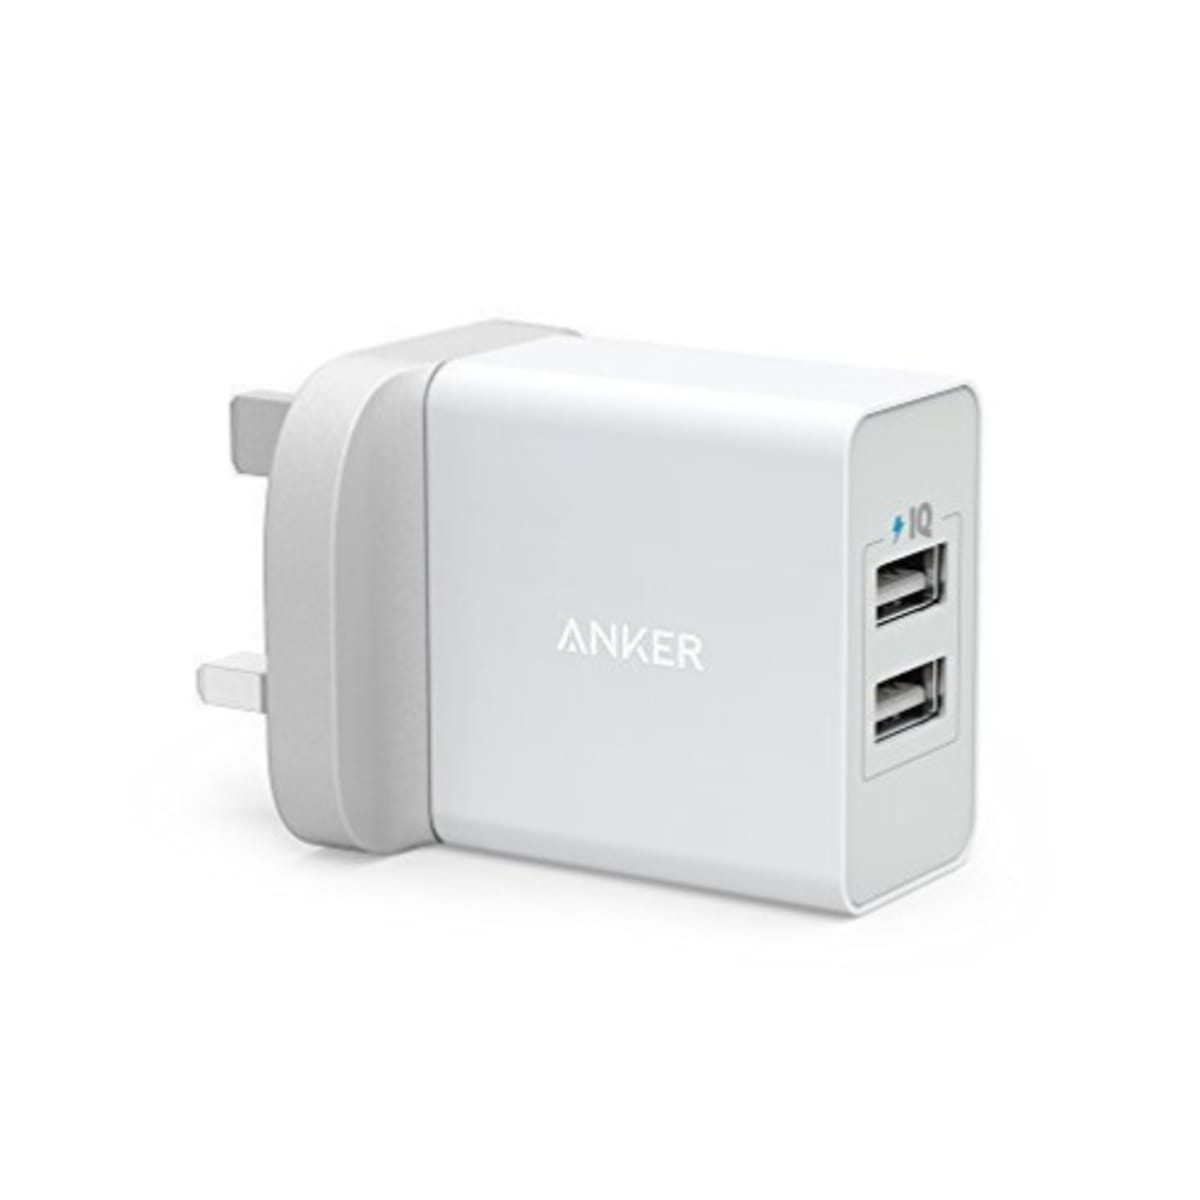 Anker 24w 2 Port Usb Wall Charger – White